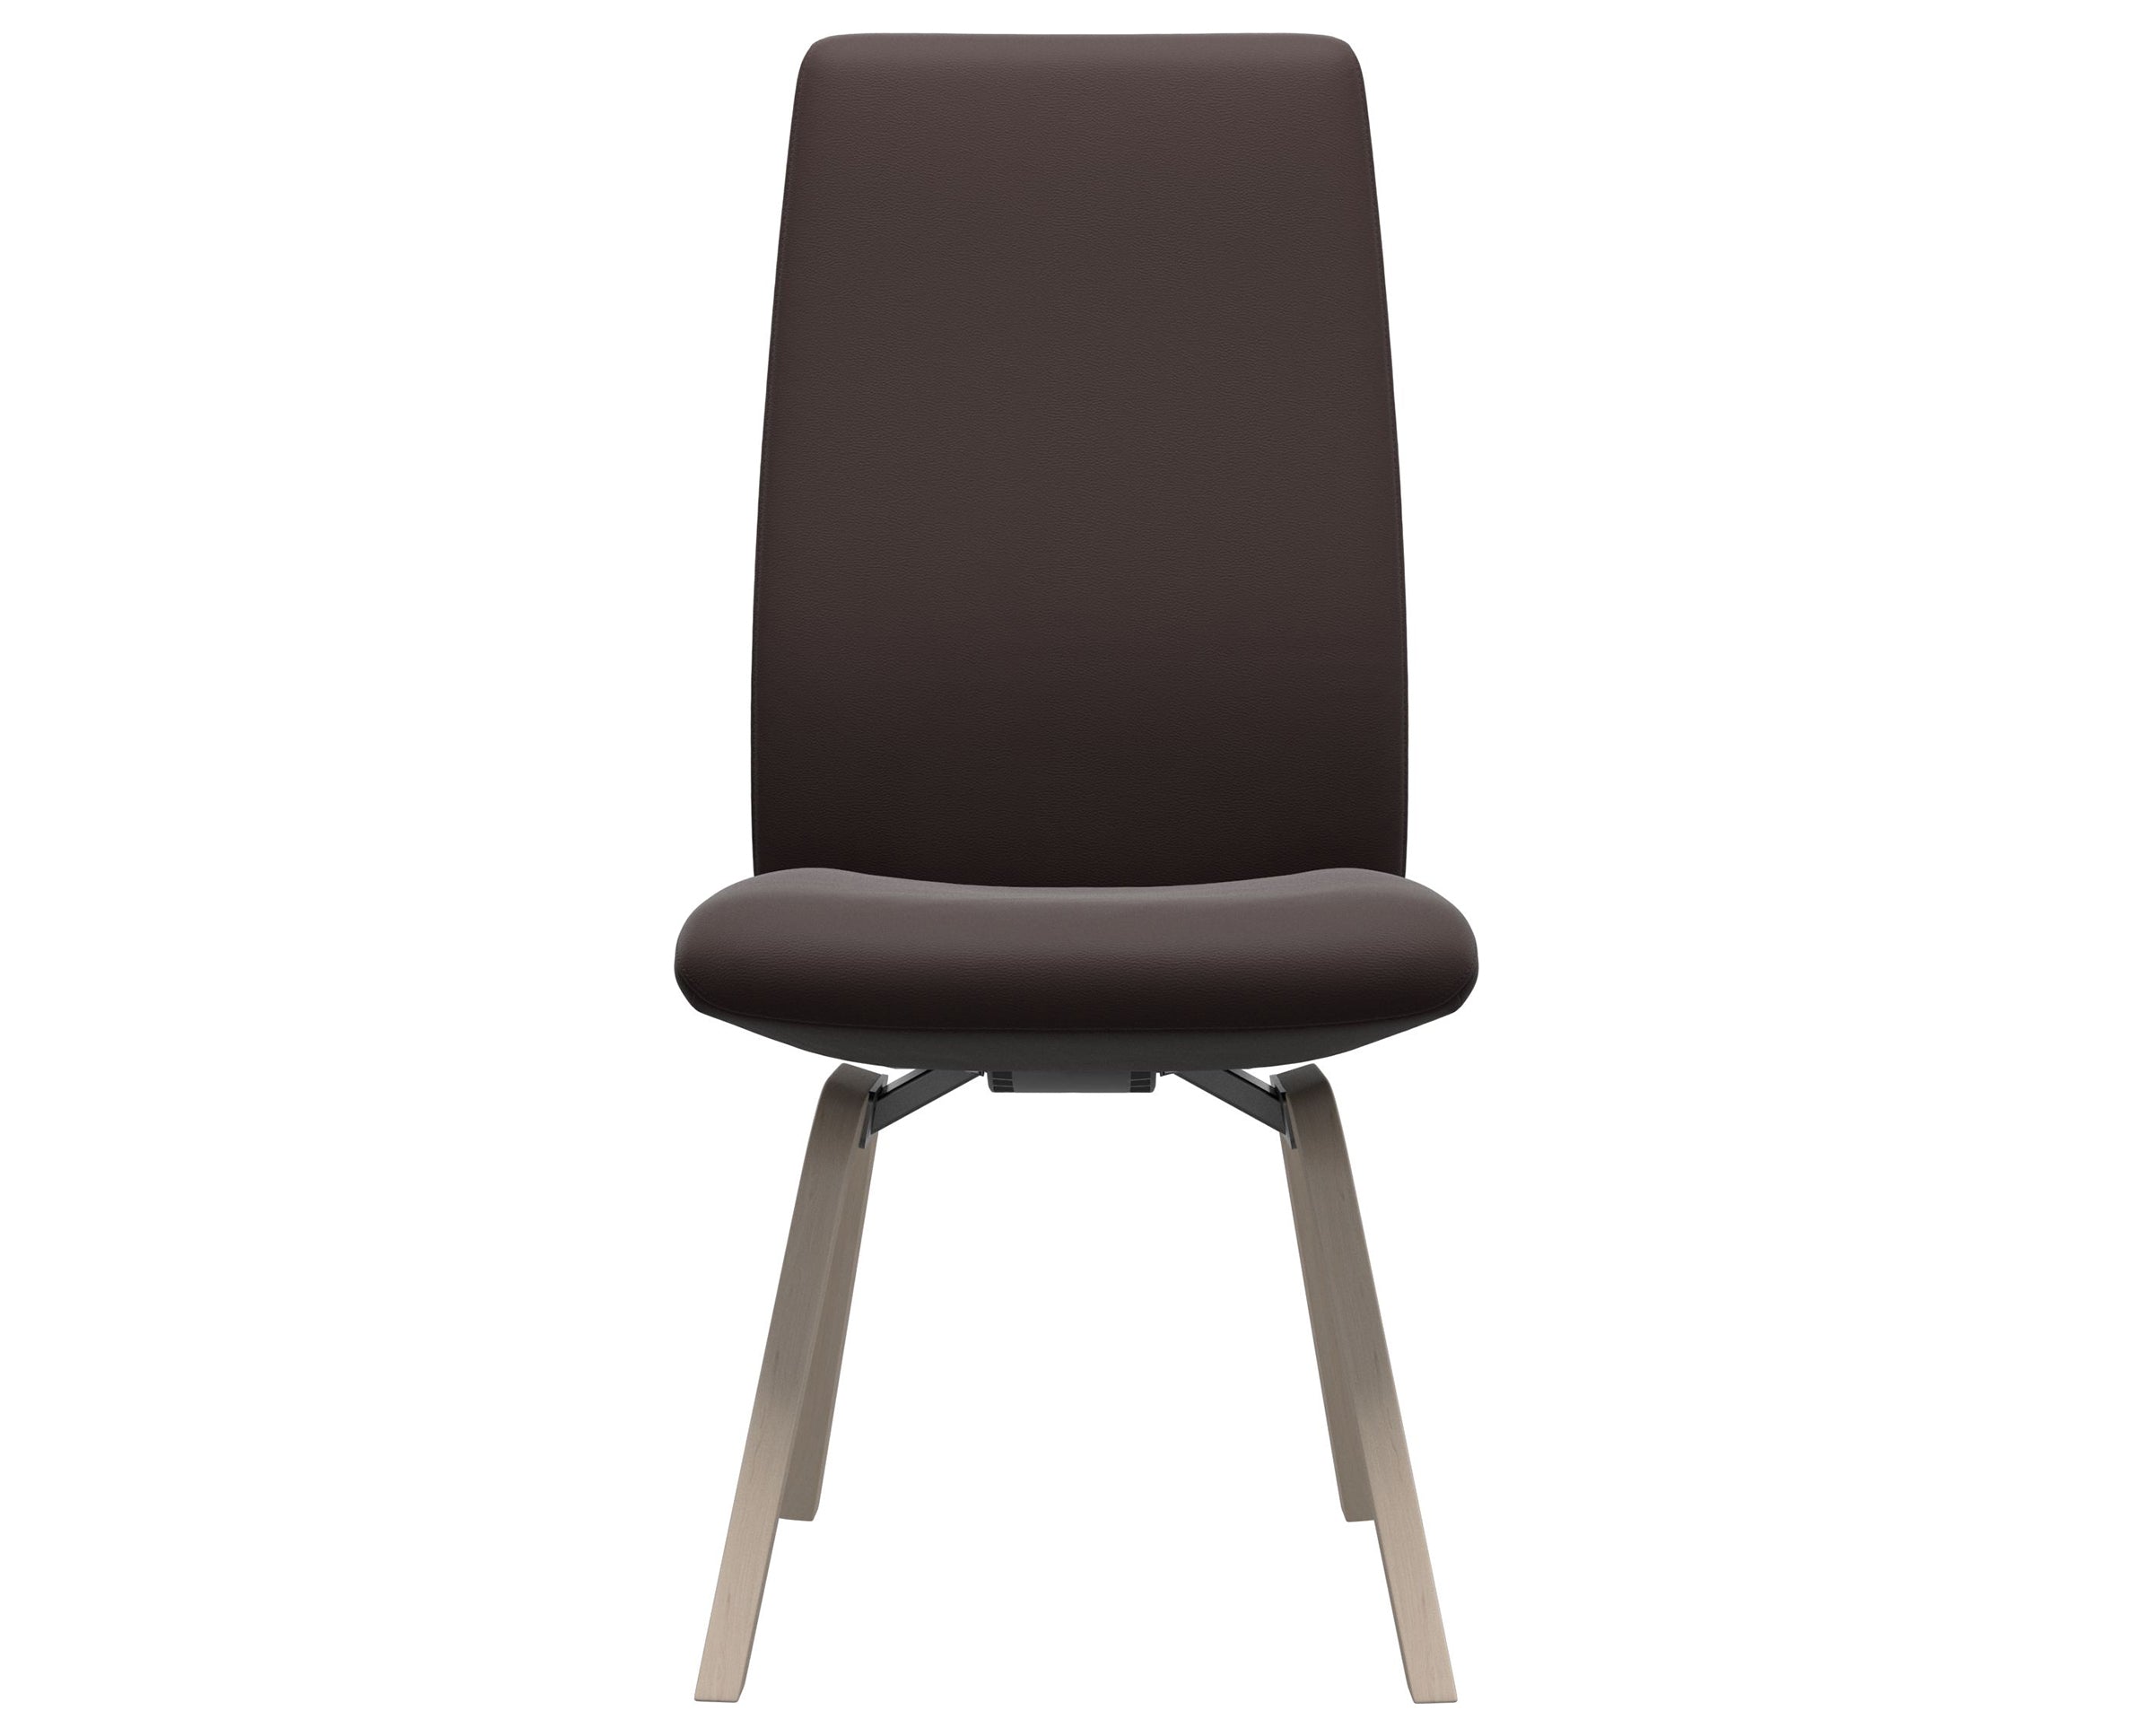 Paloma Leather Chocolate and Whitewash Base | Stressless Laurel High Back D200 Dining Chair | Valley Ridge Furniture